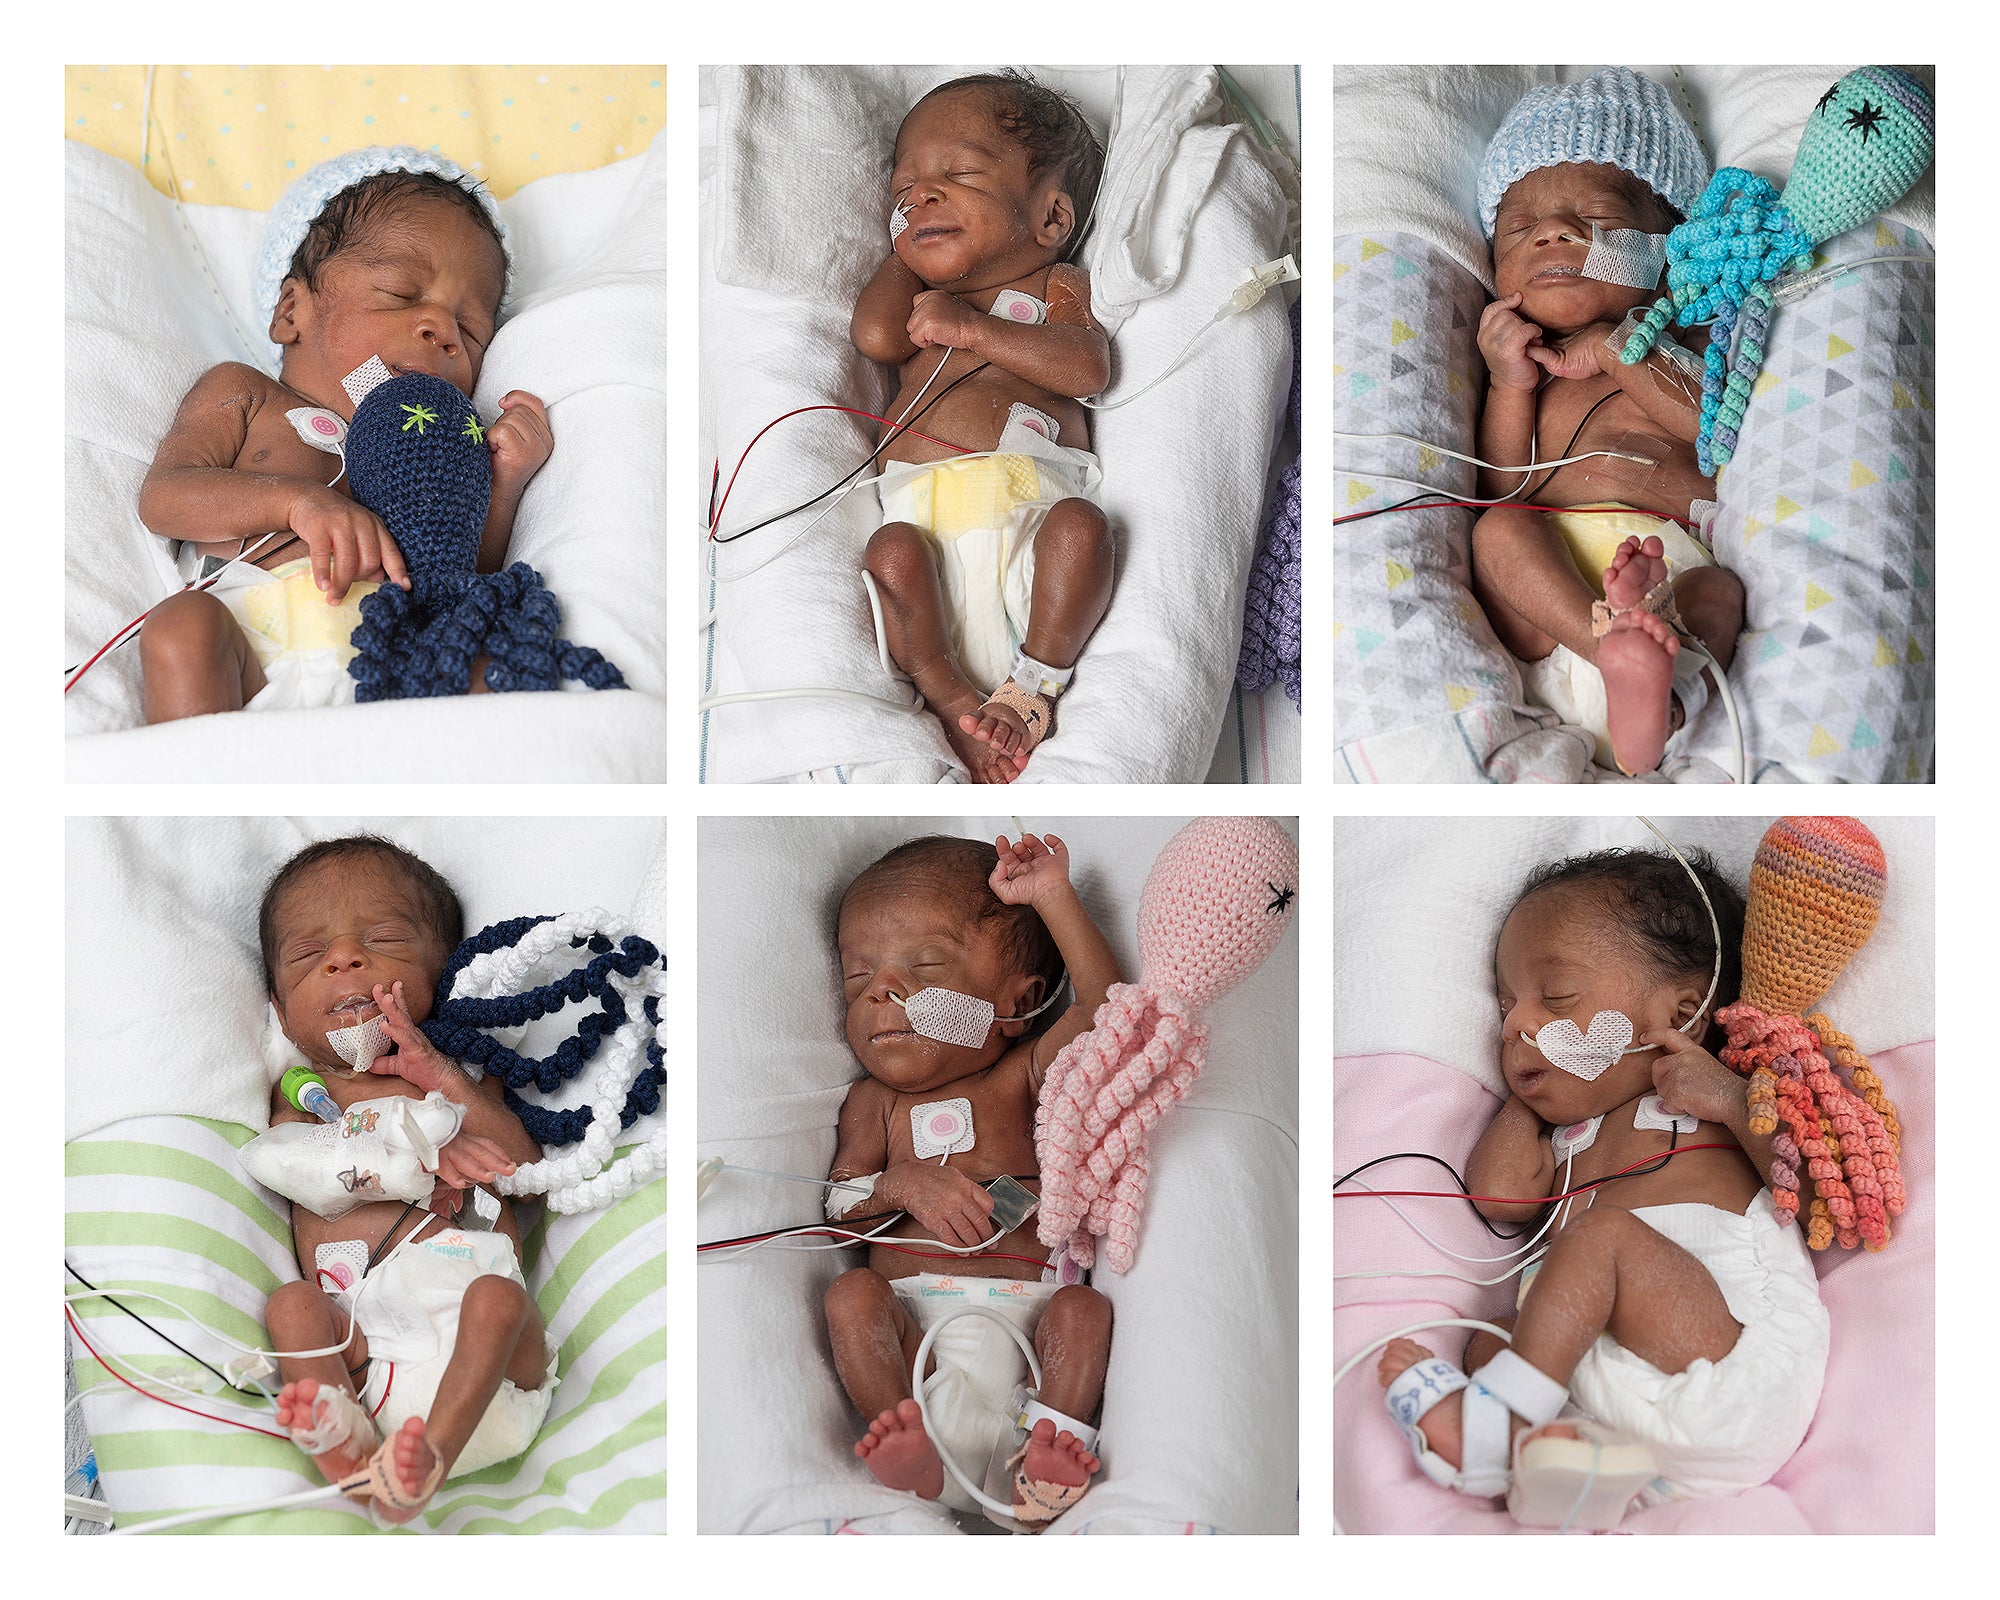 Couple Who Tried To Conceive For 17 Years Welcomes Sextuplets
